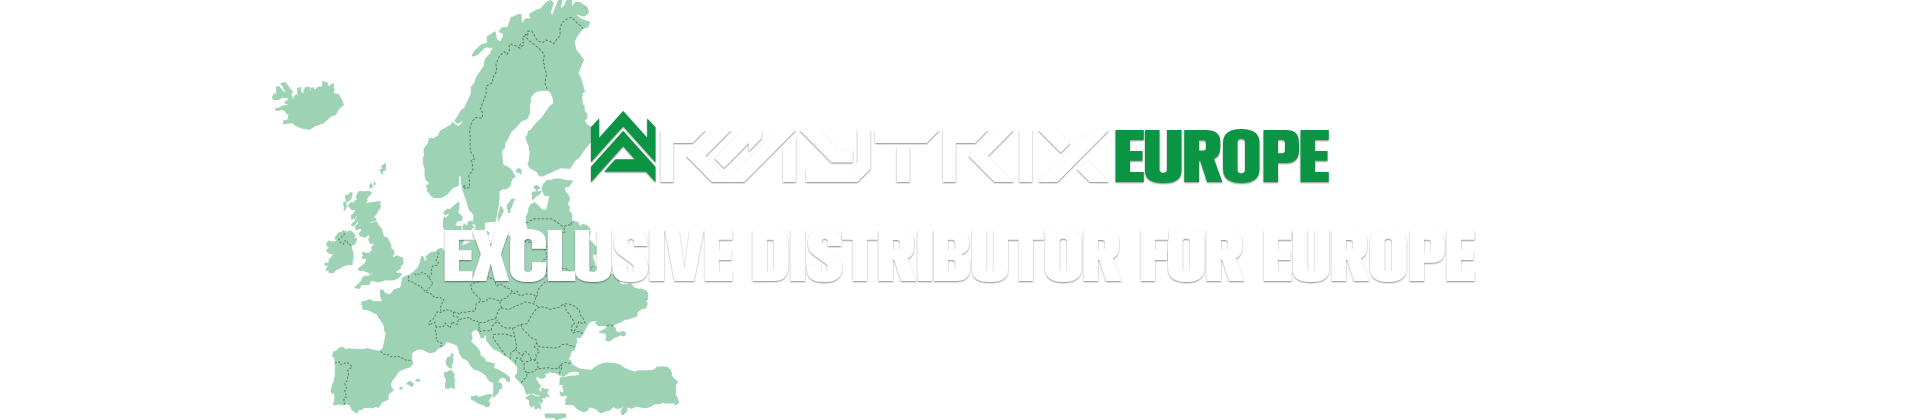 Armytrix Europe - Exclusive Distributor for Europe